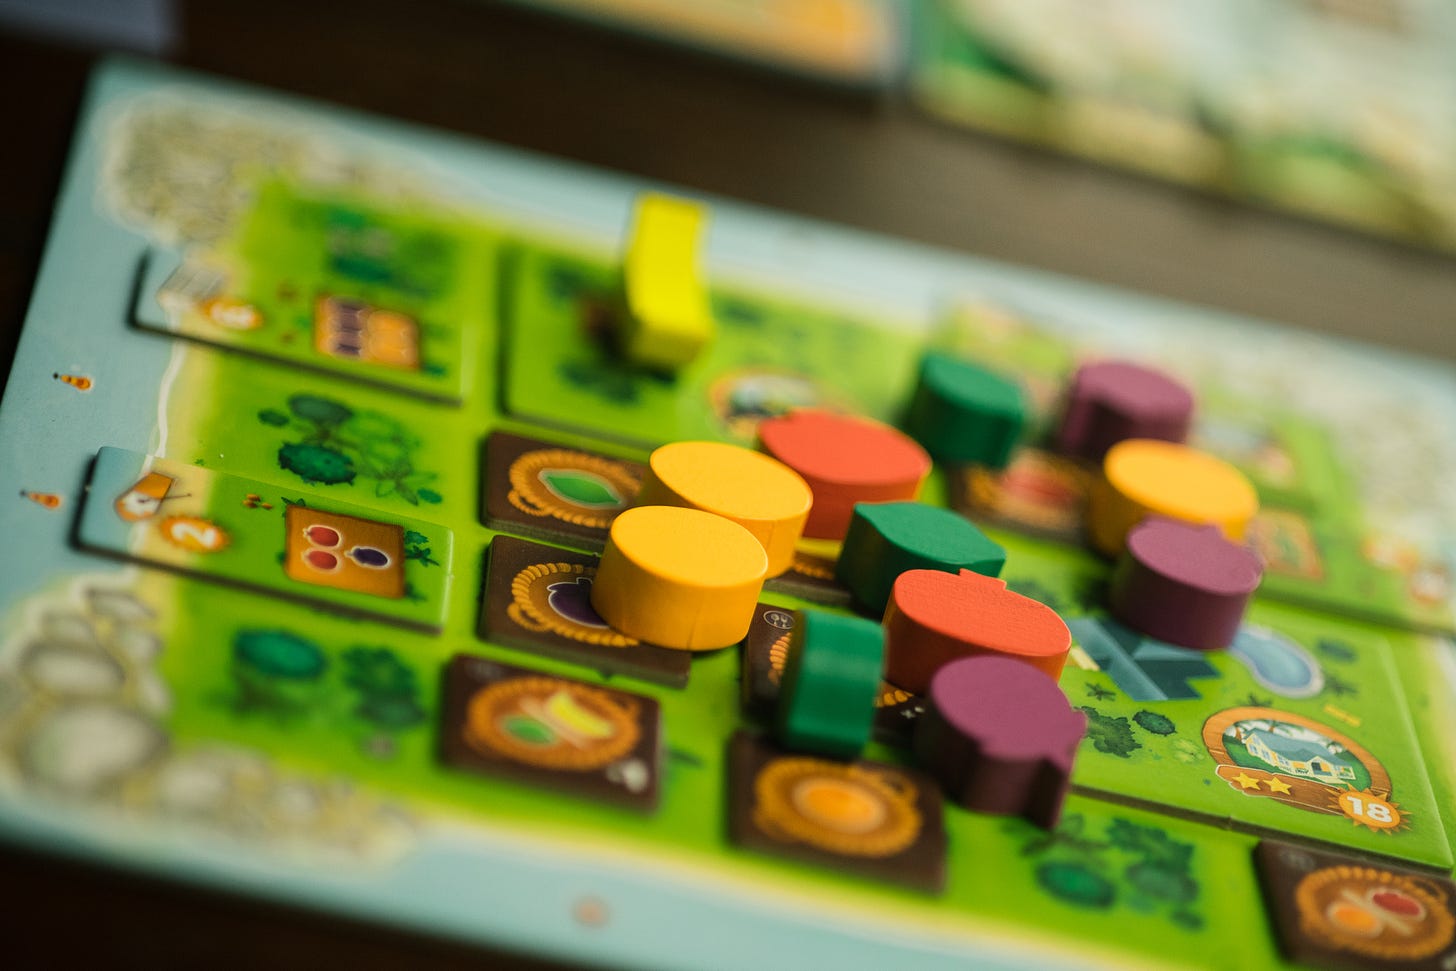 Photograph of the board game Juicy Fruits